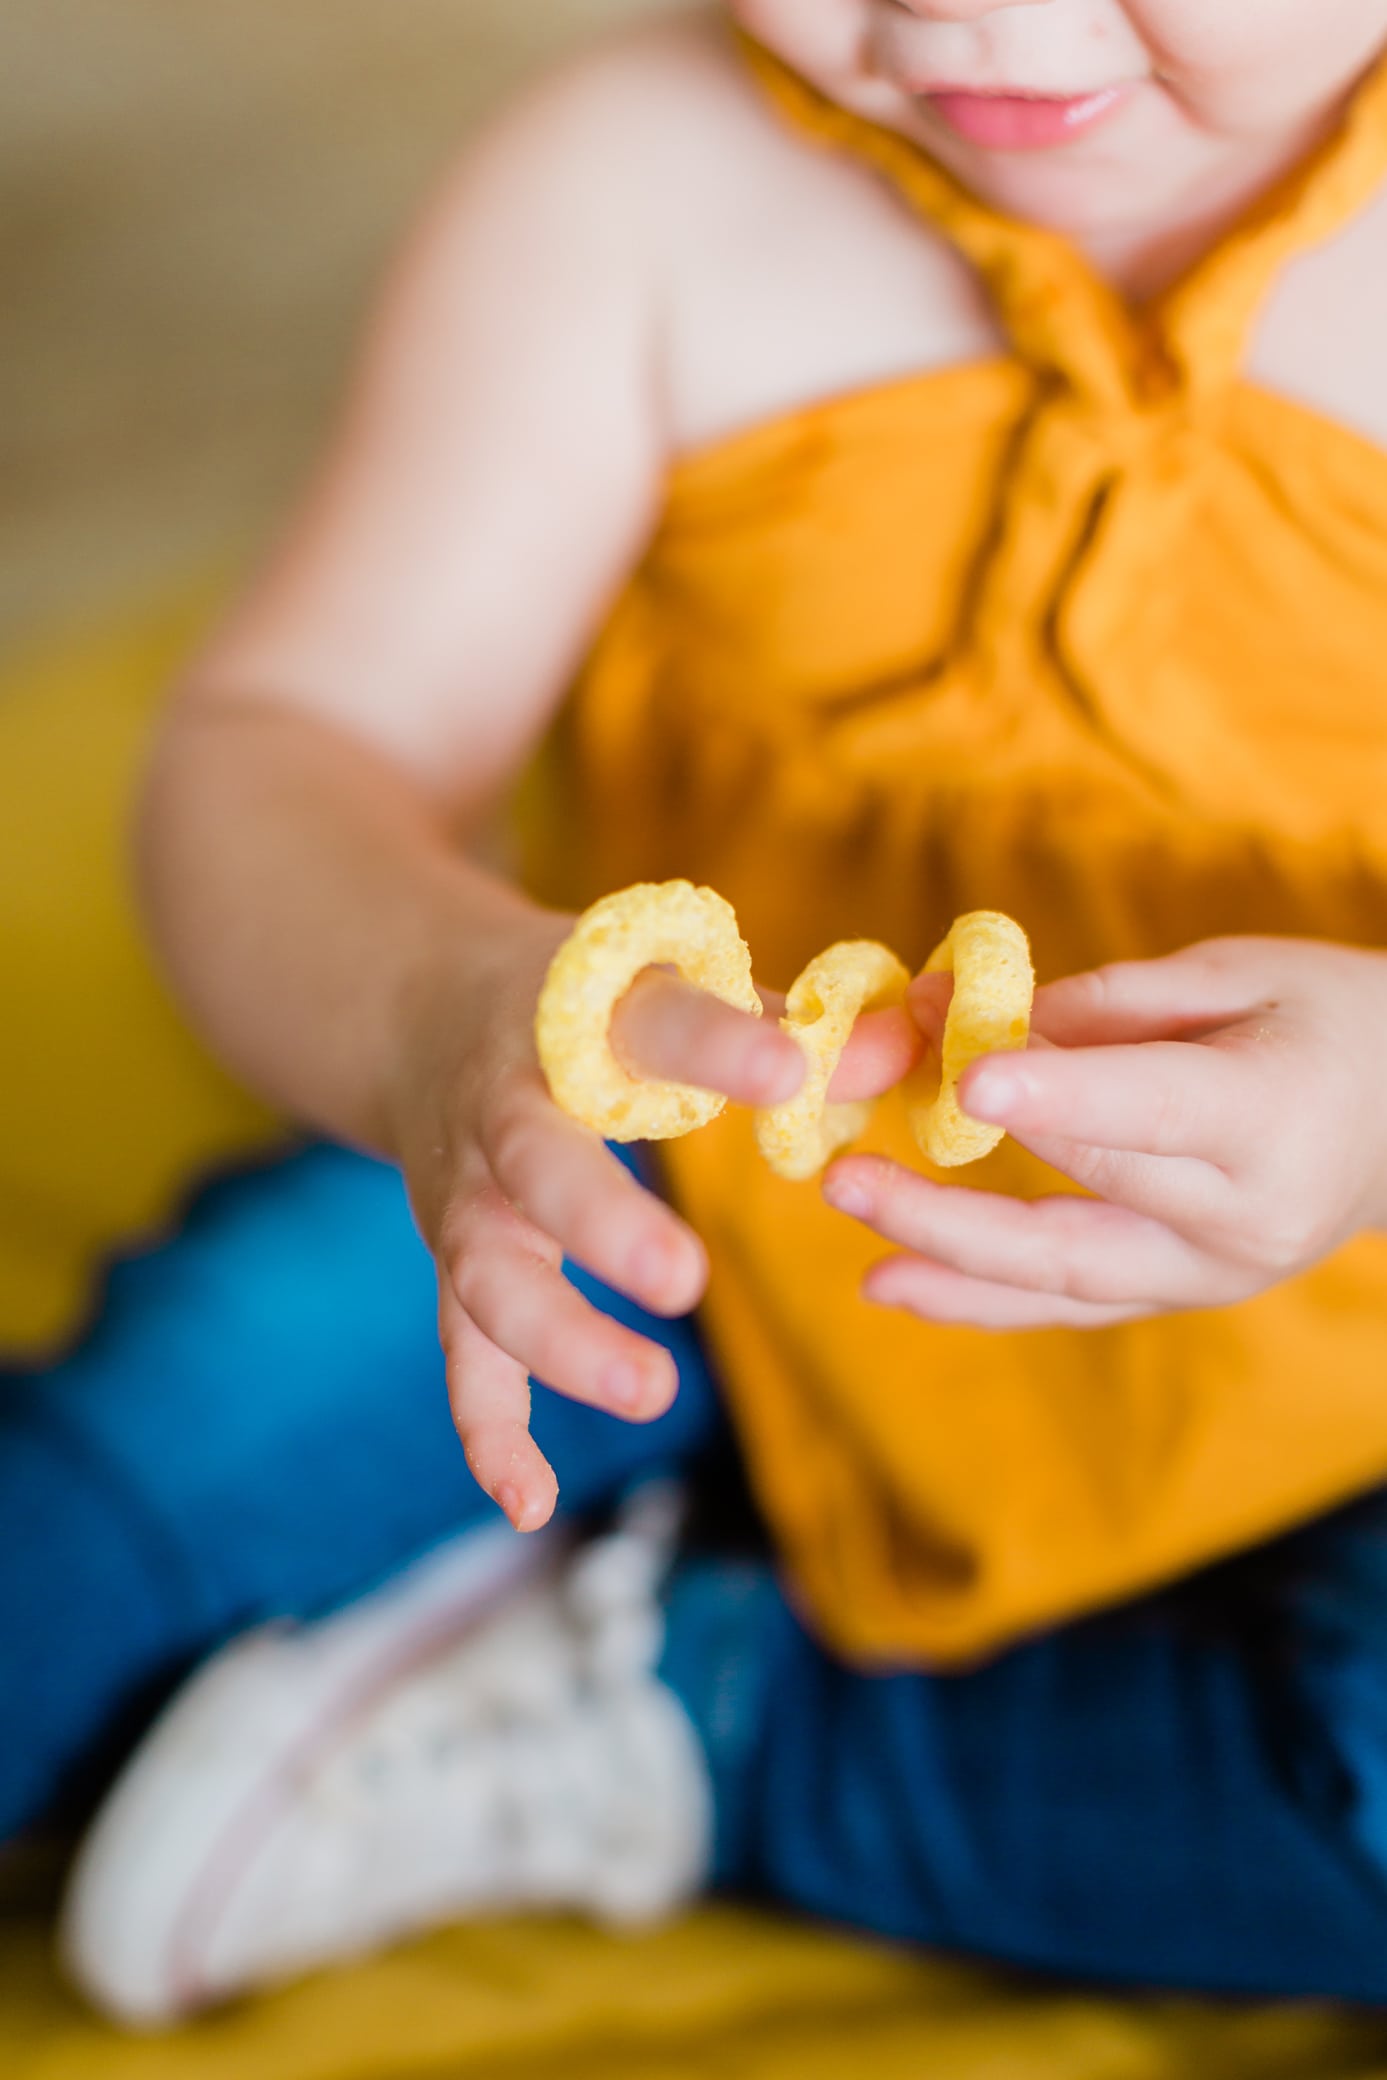 Little Bellies: A Healthy Baby Snack You Can Feel Good About